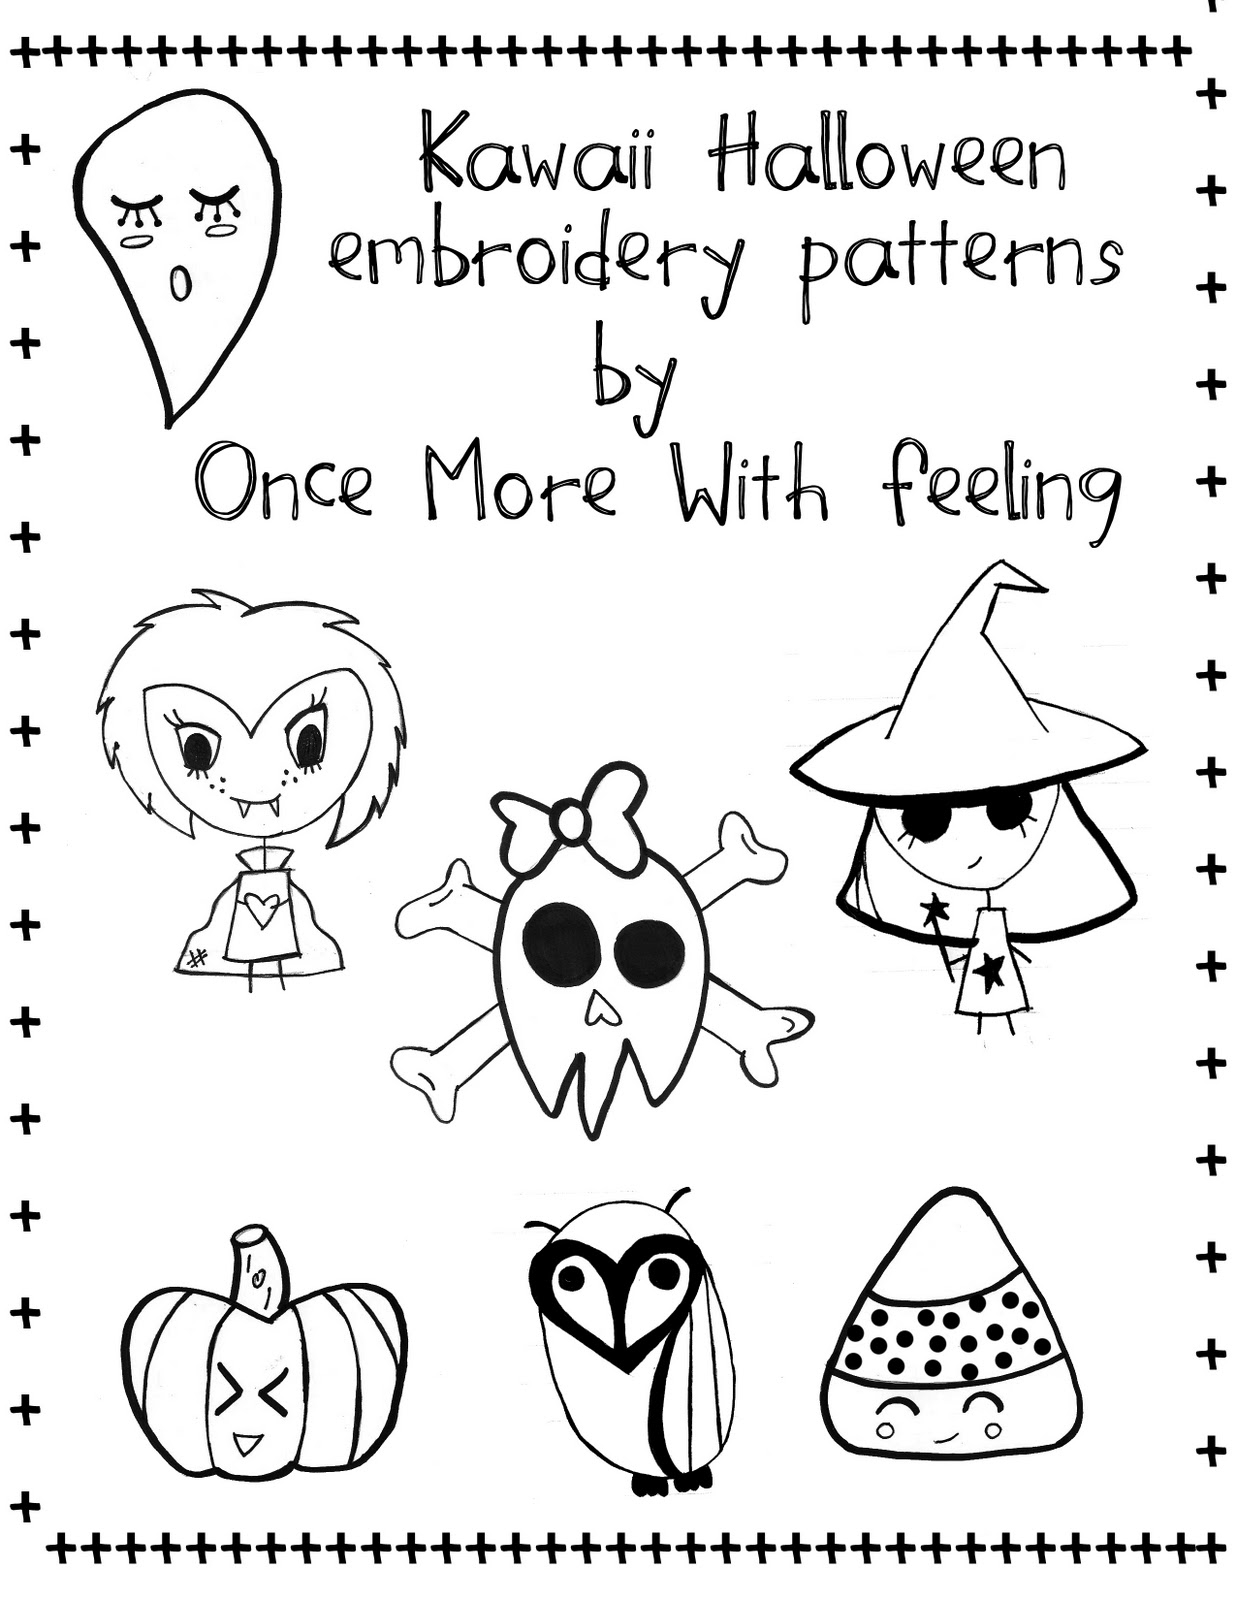 Halloween Embroidery Patterns Once More With Feeling My Life As A Teacup